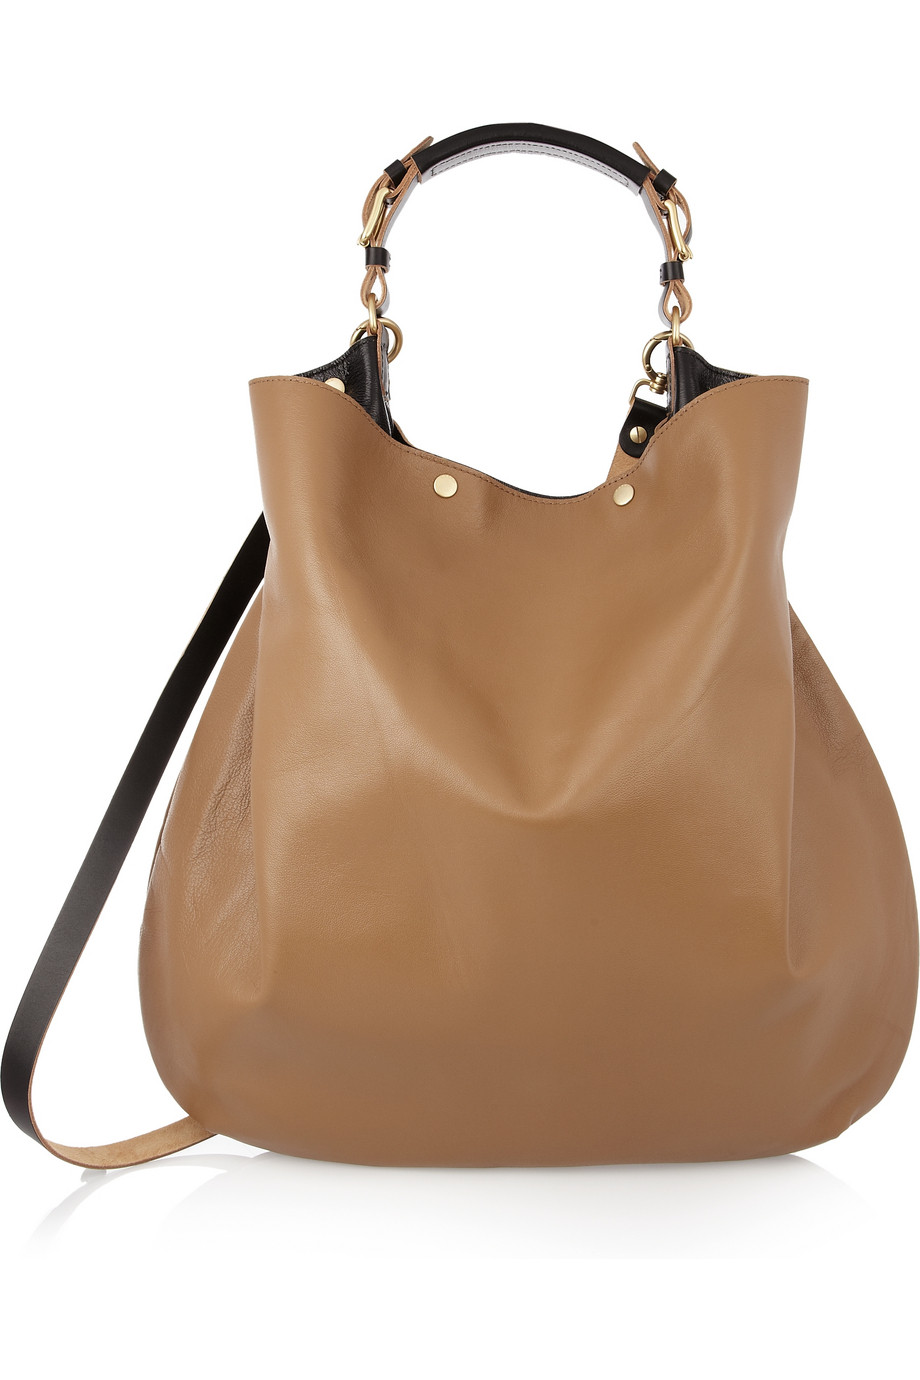 Marni Leather Hobo Bag in Brown | Lyst